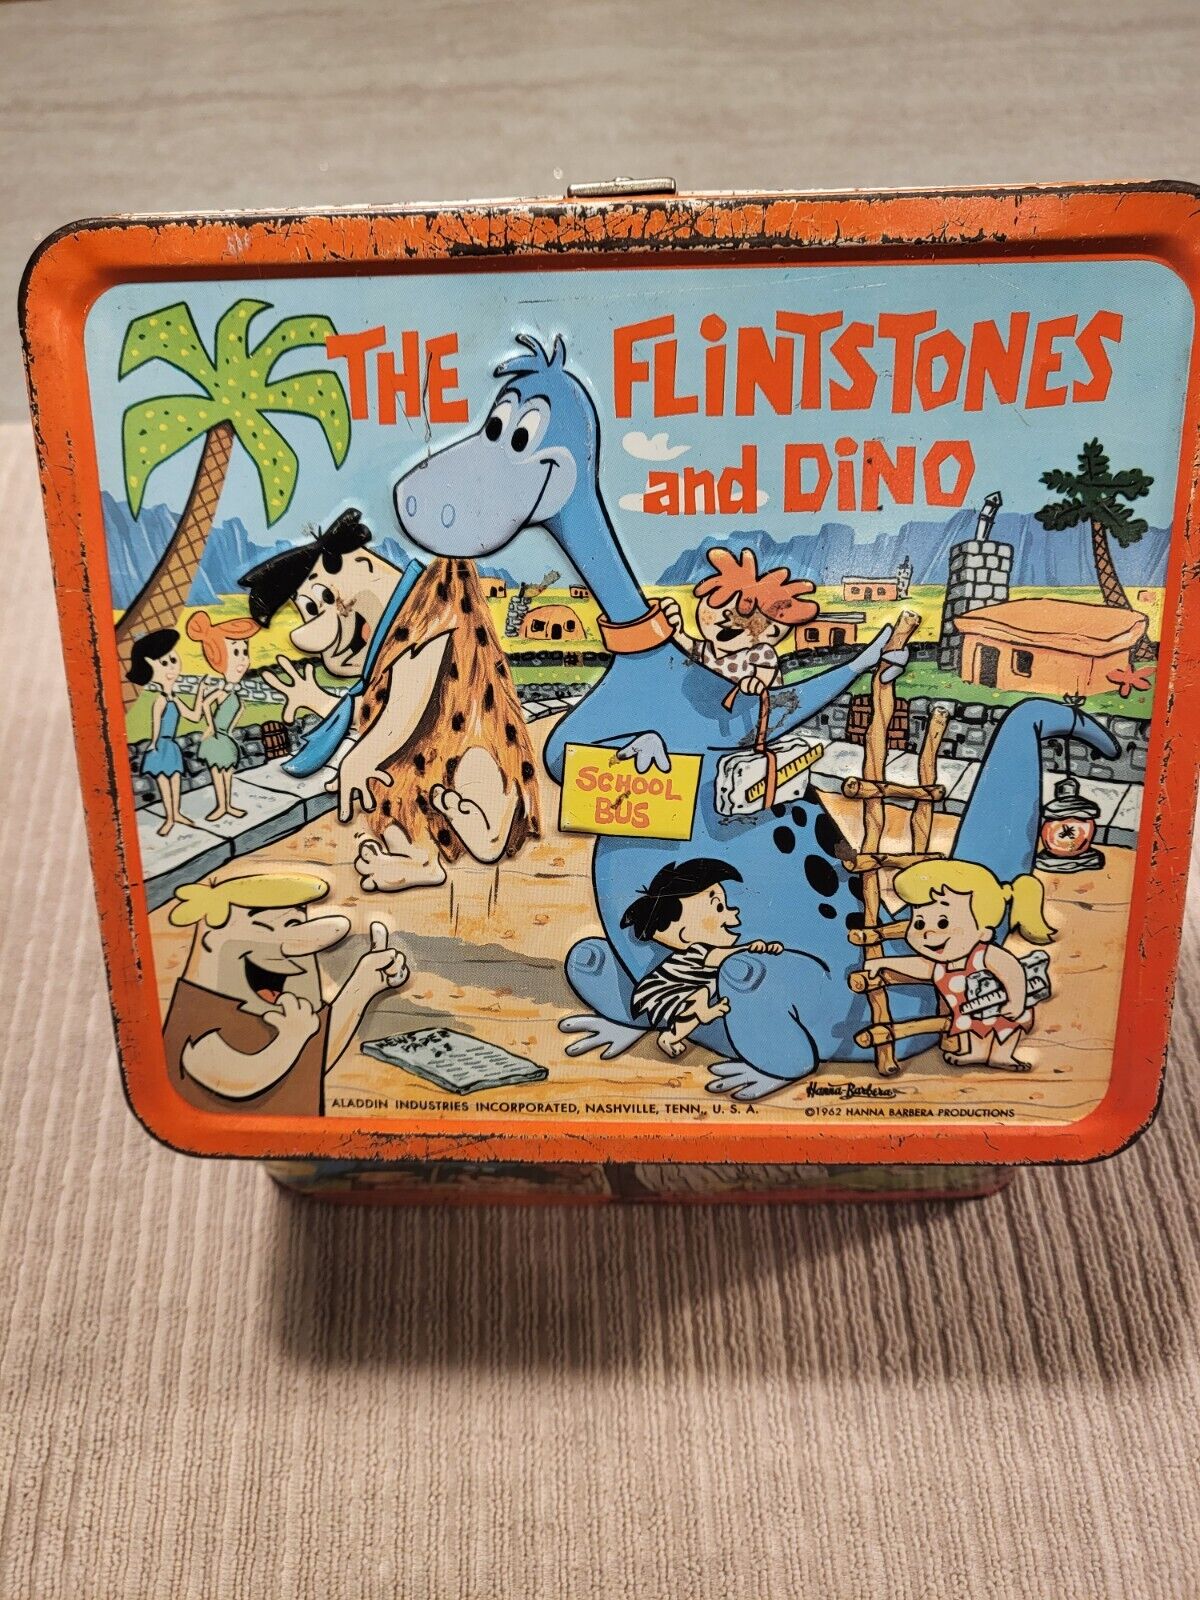 1962 Aladdin Industries The Flintstones and Dino Metal Lunch Box and Thermos